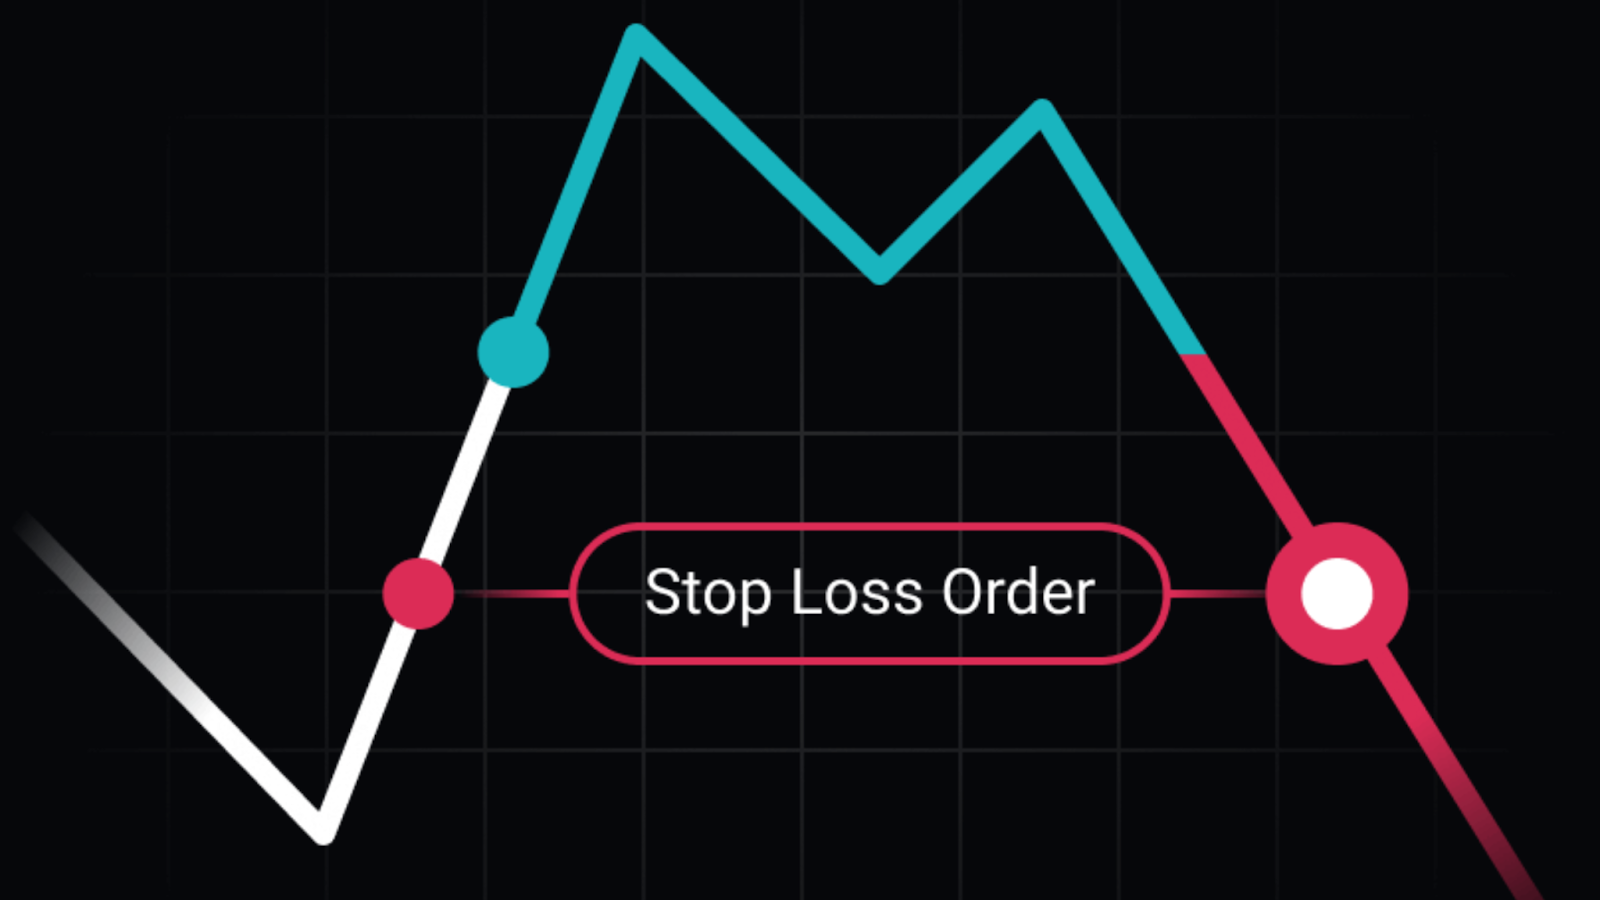 Way to avoid Pump and Dump: Use Stop Loss Order